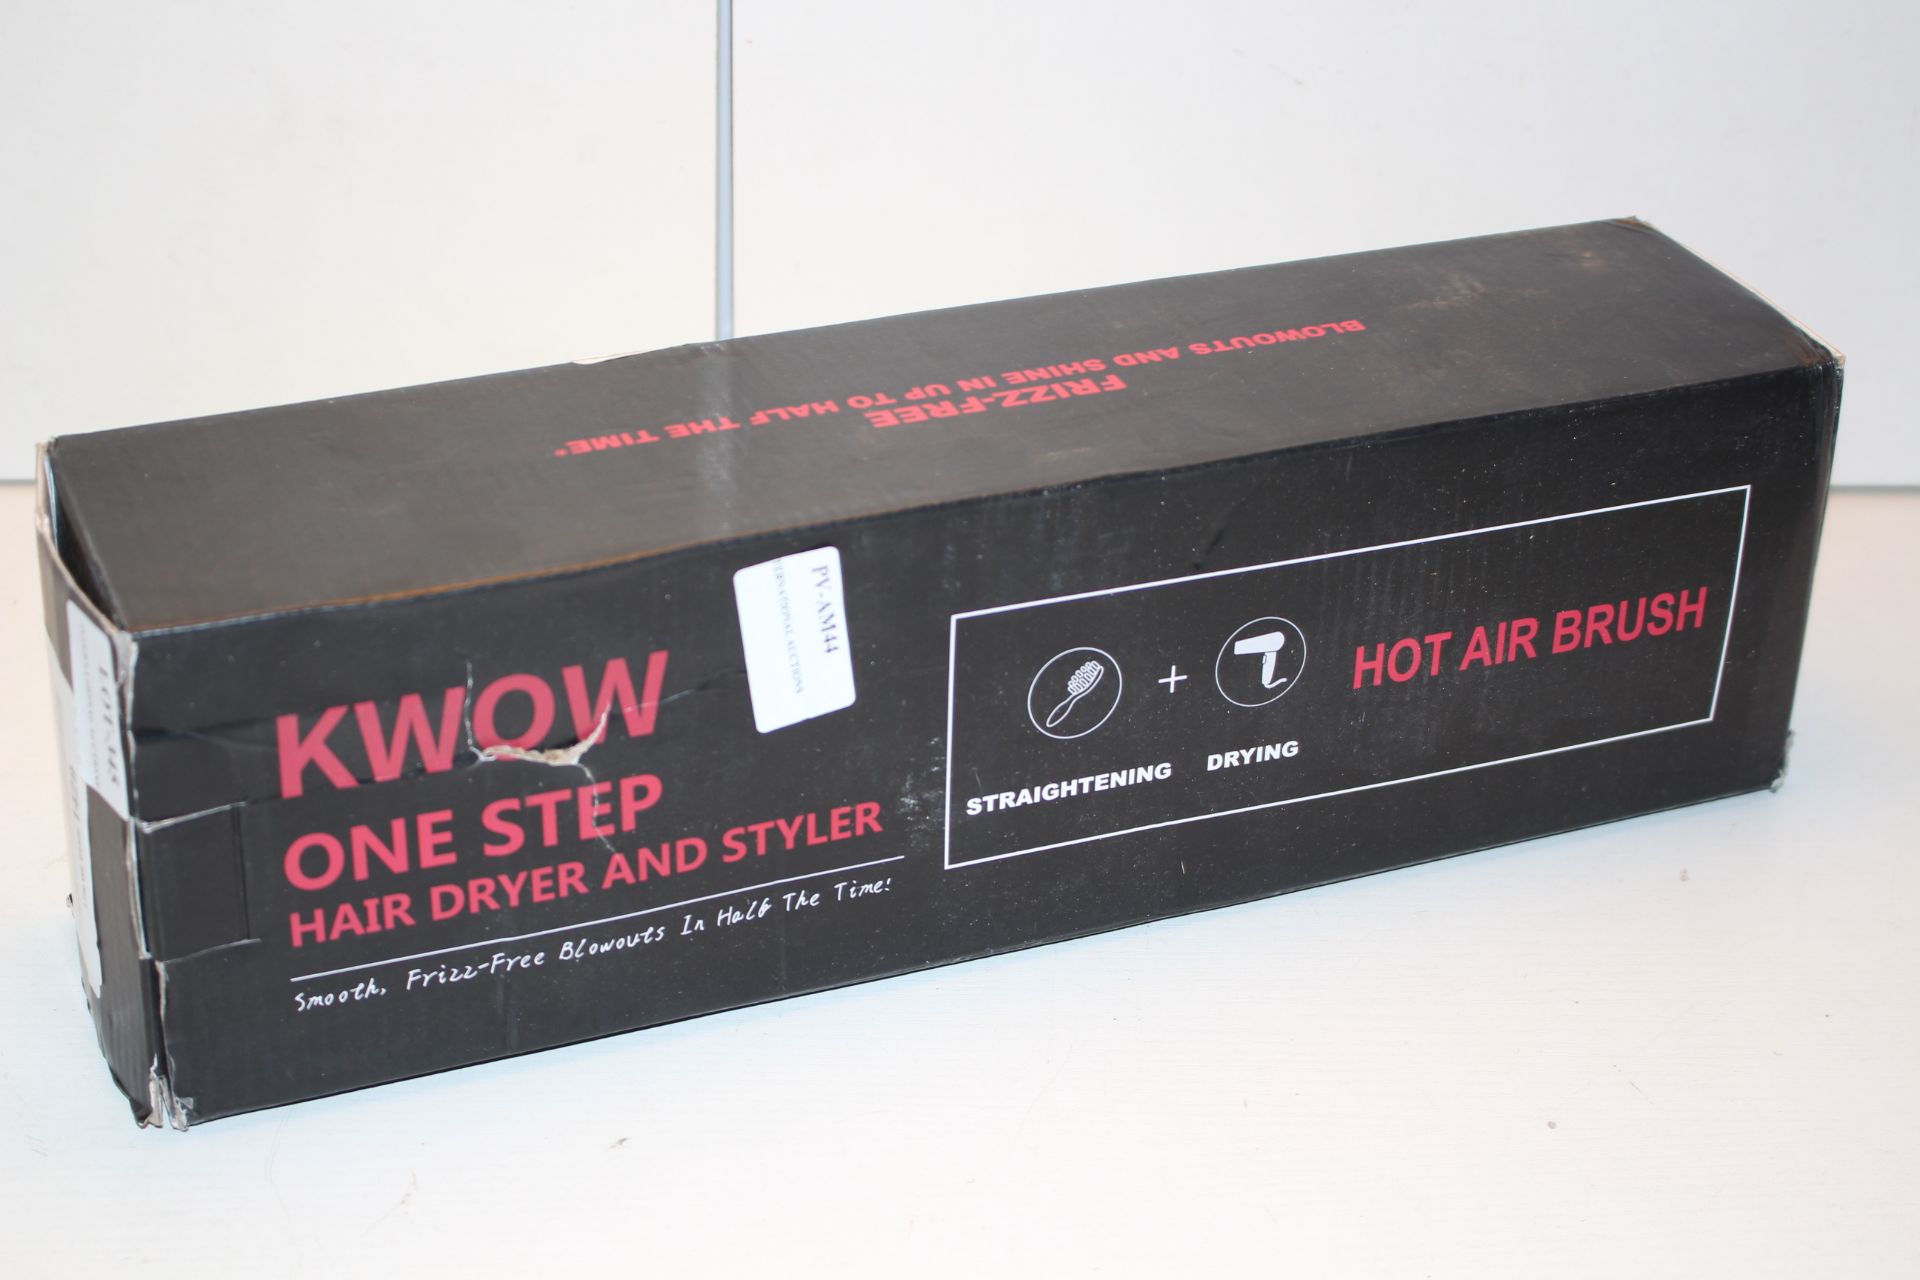 BOXED KWOW ONE STEP HAIR DRYER AND STYLER Condition ReportAppraisal Available on Request- All